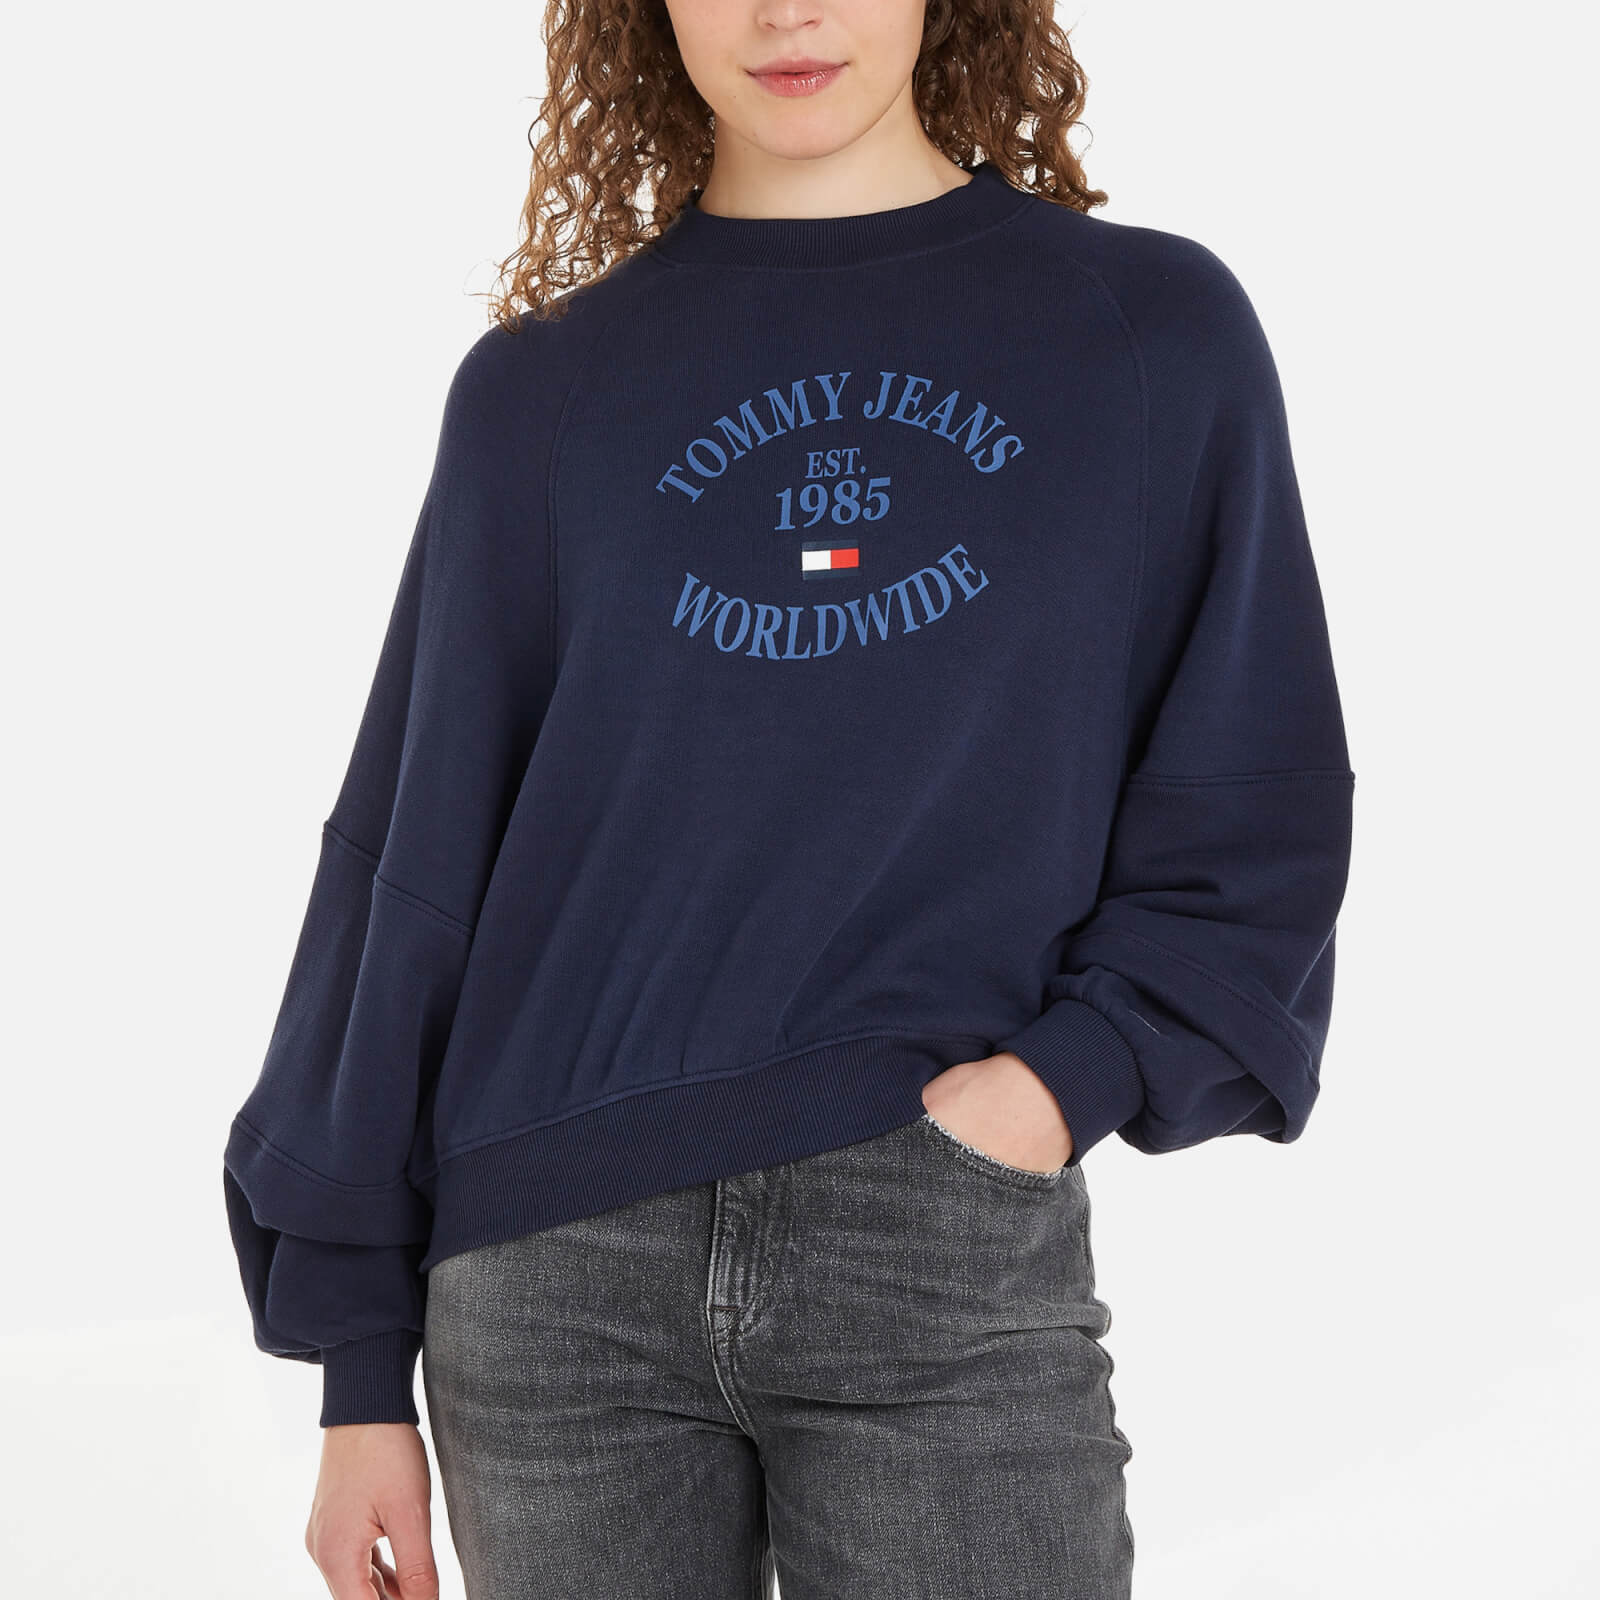 Tommy Jeans Relaxed Worldwide Cotton Sweatshirt product